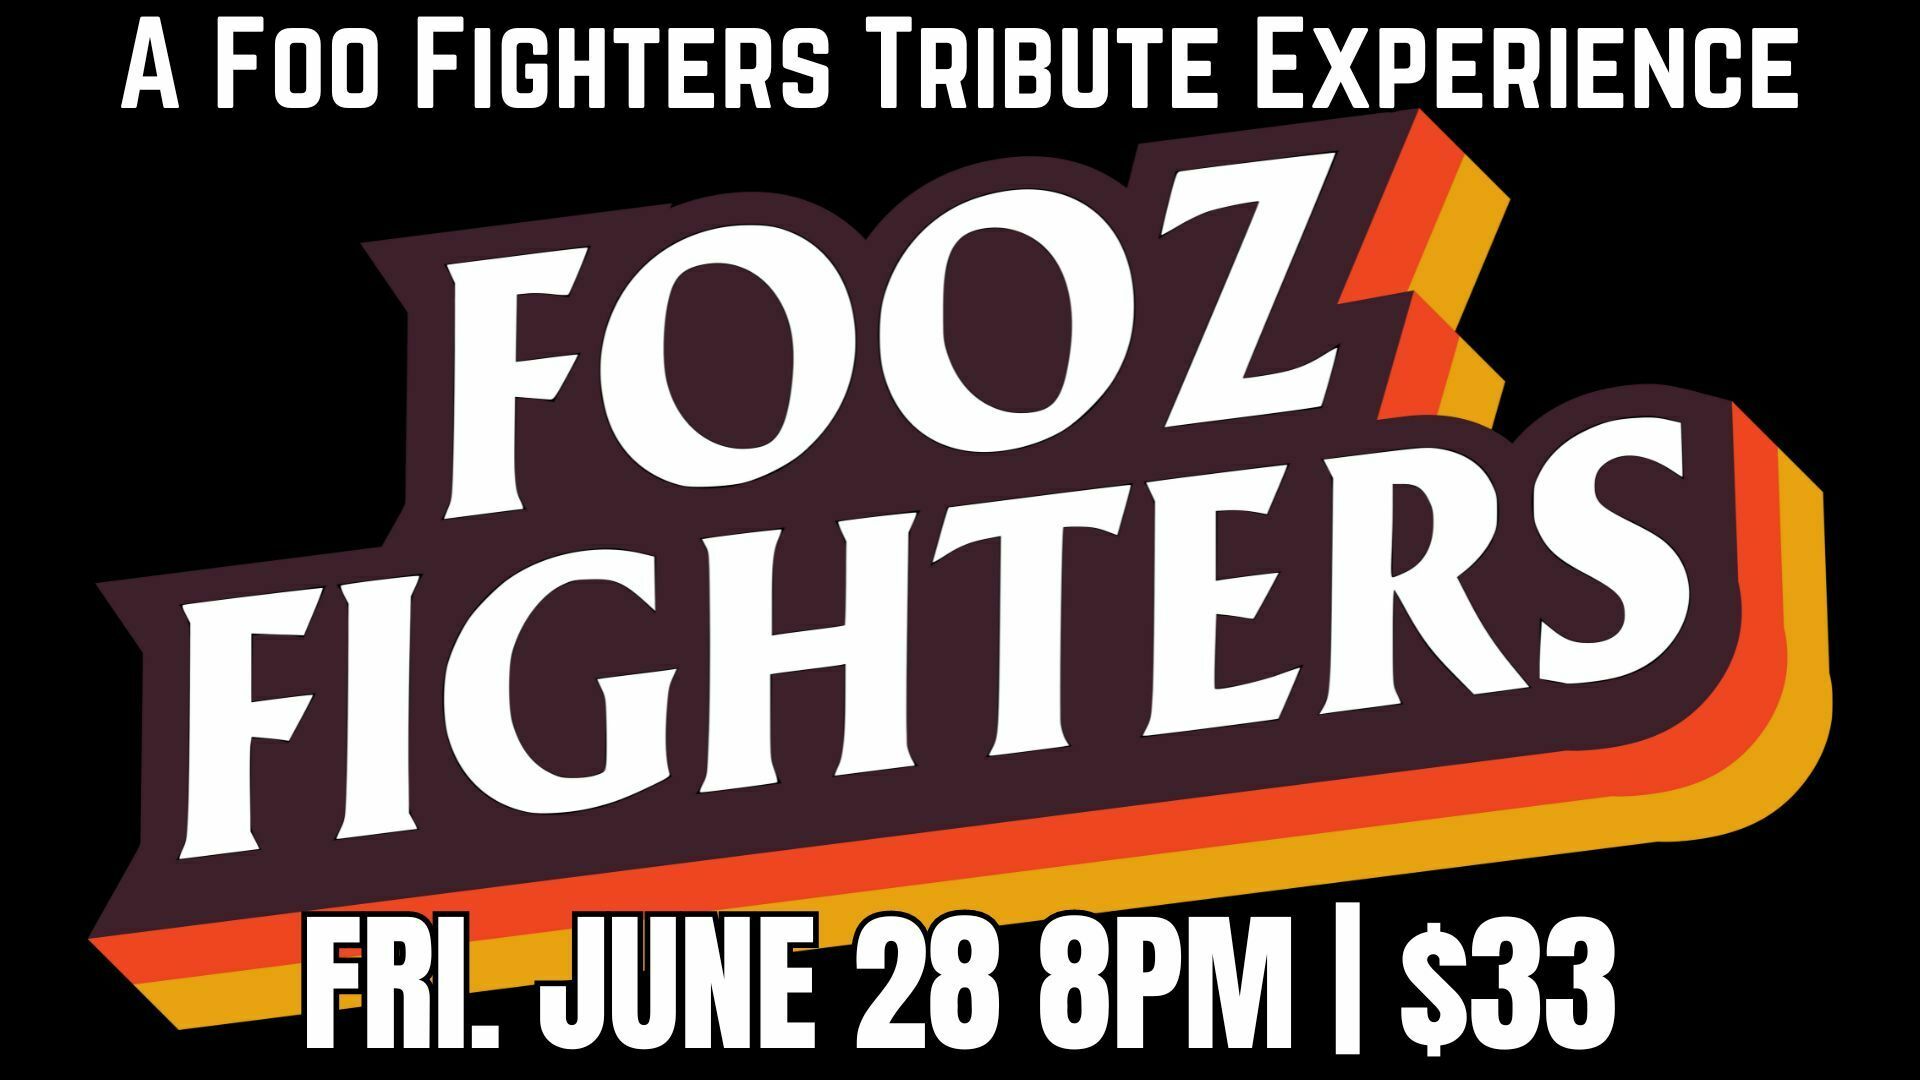 Fooz Fighters: a Foo Fighters Tribute Experience, Irwin, Pennsylvania, United States